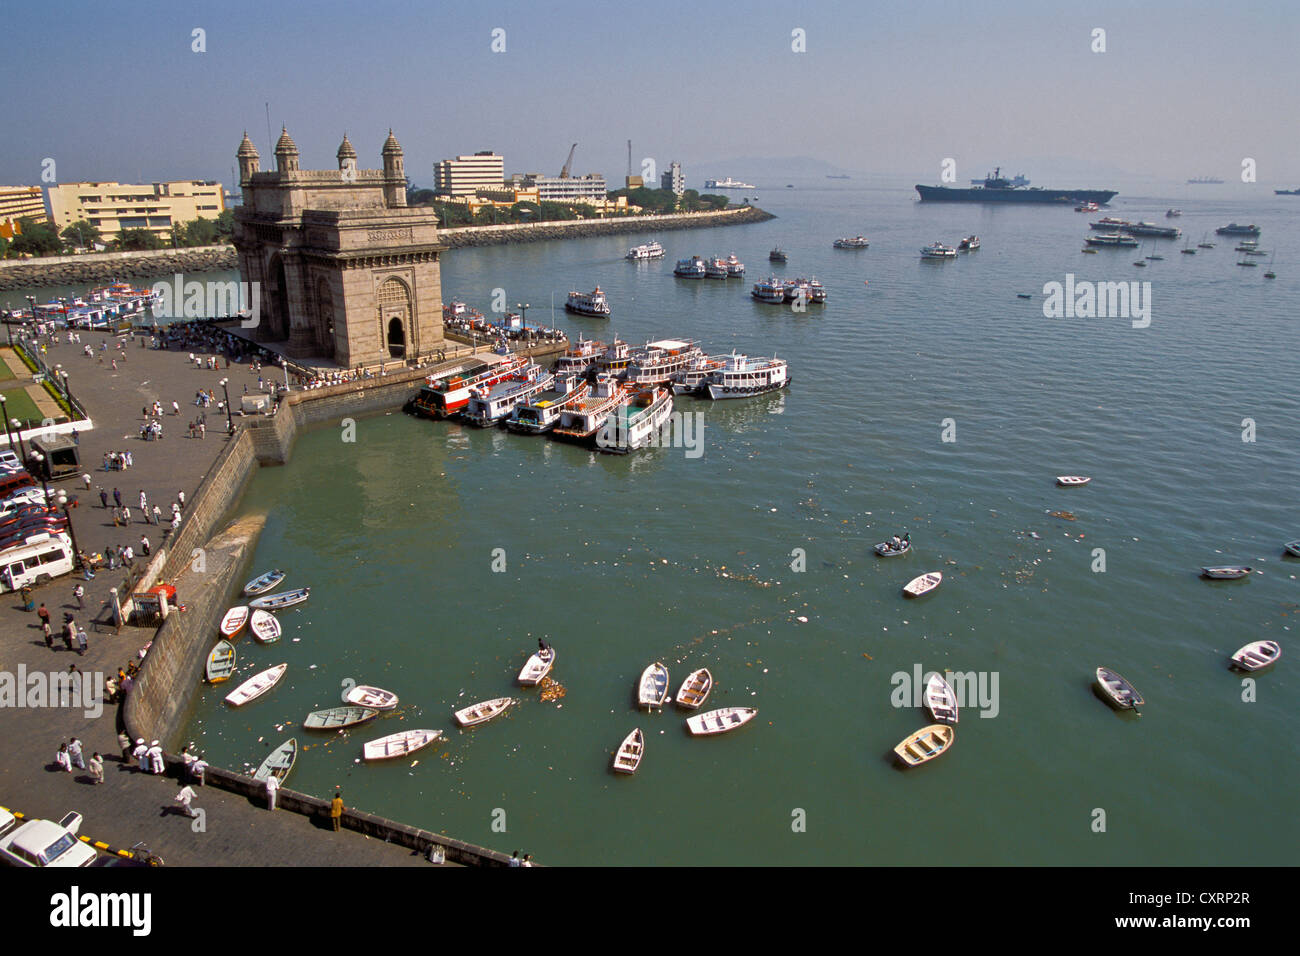 Boats, Gateway of India, famous landmark of Mumbai built to commemorate the visit of King George V and his wife Mary, 1911 Stock Photo